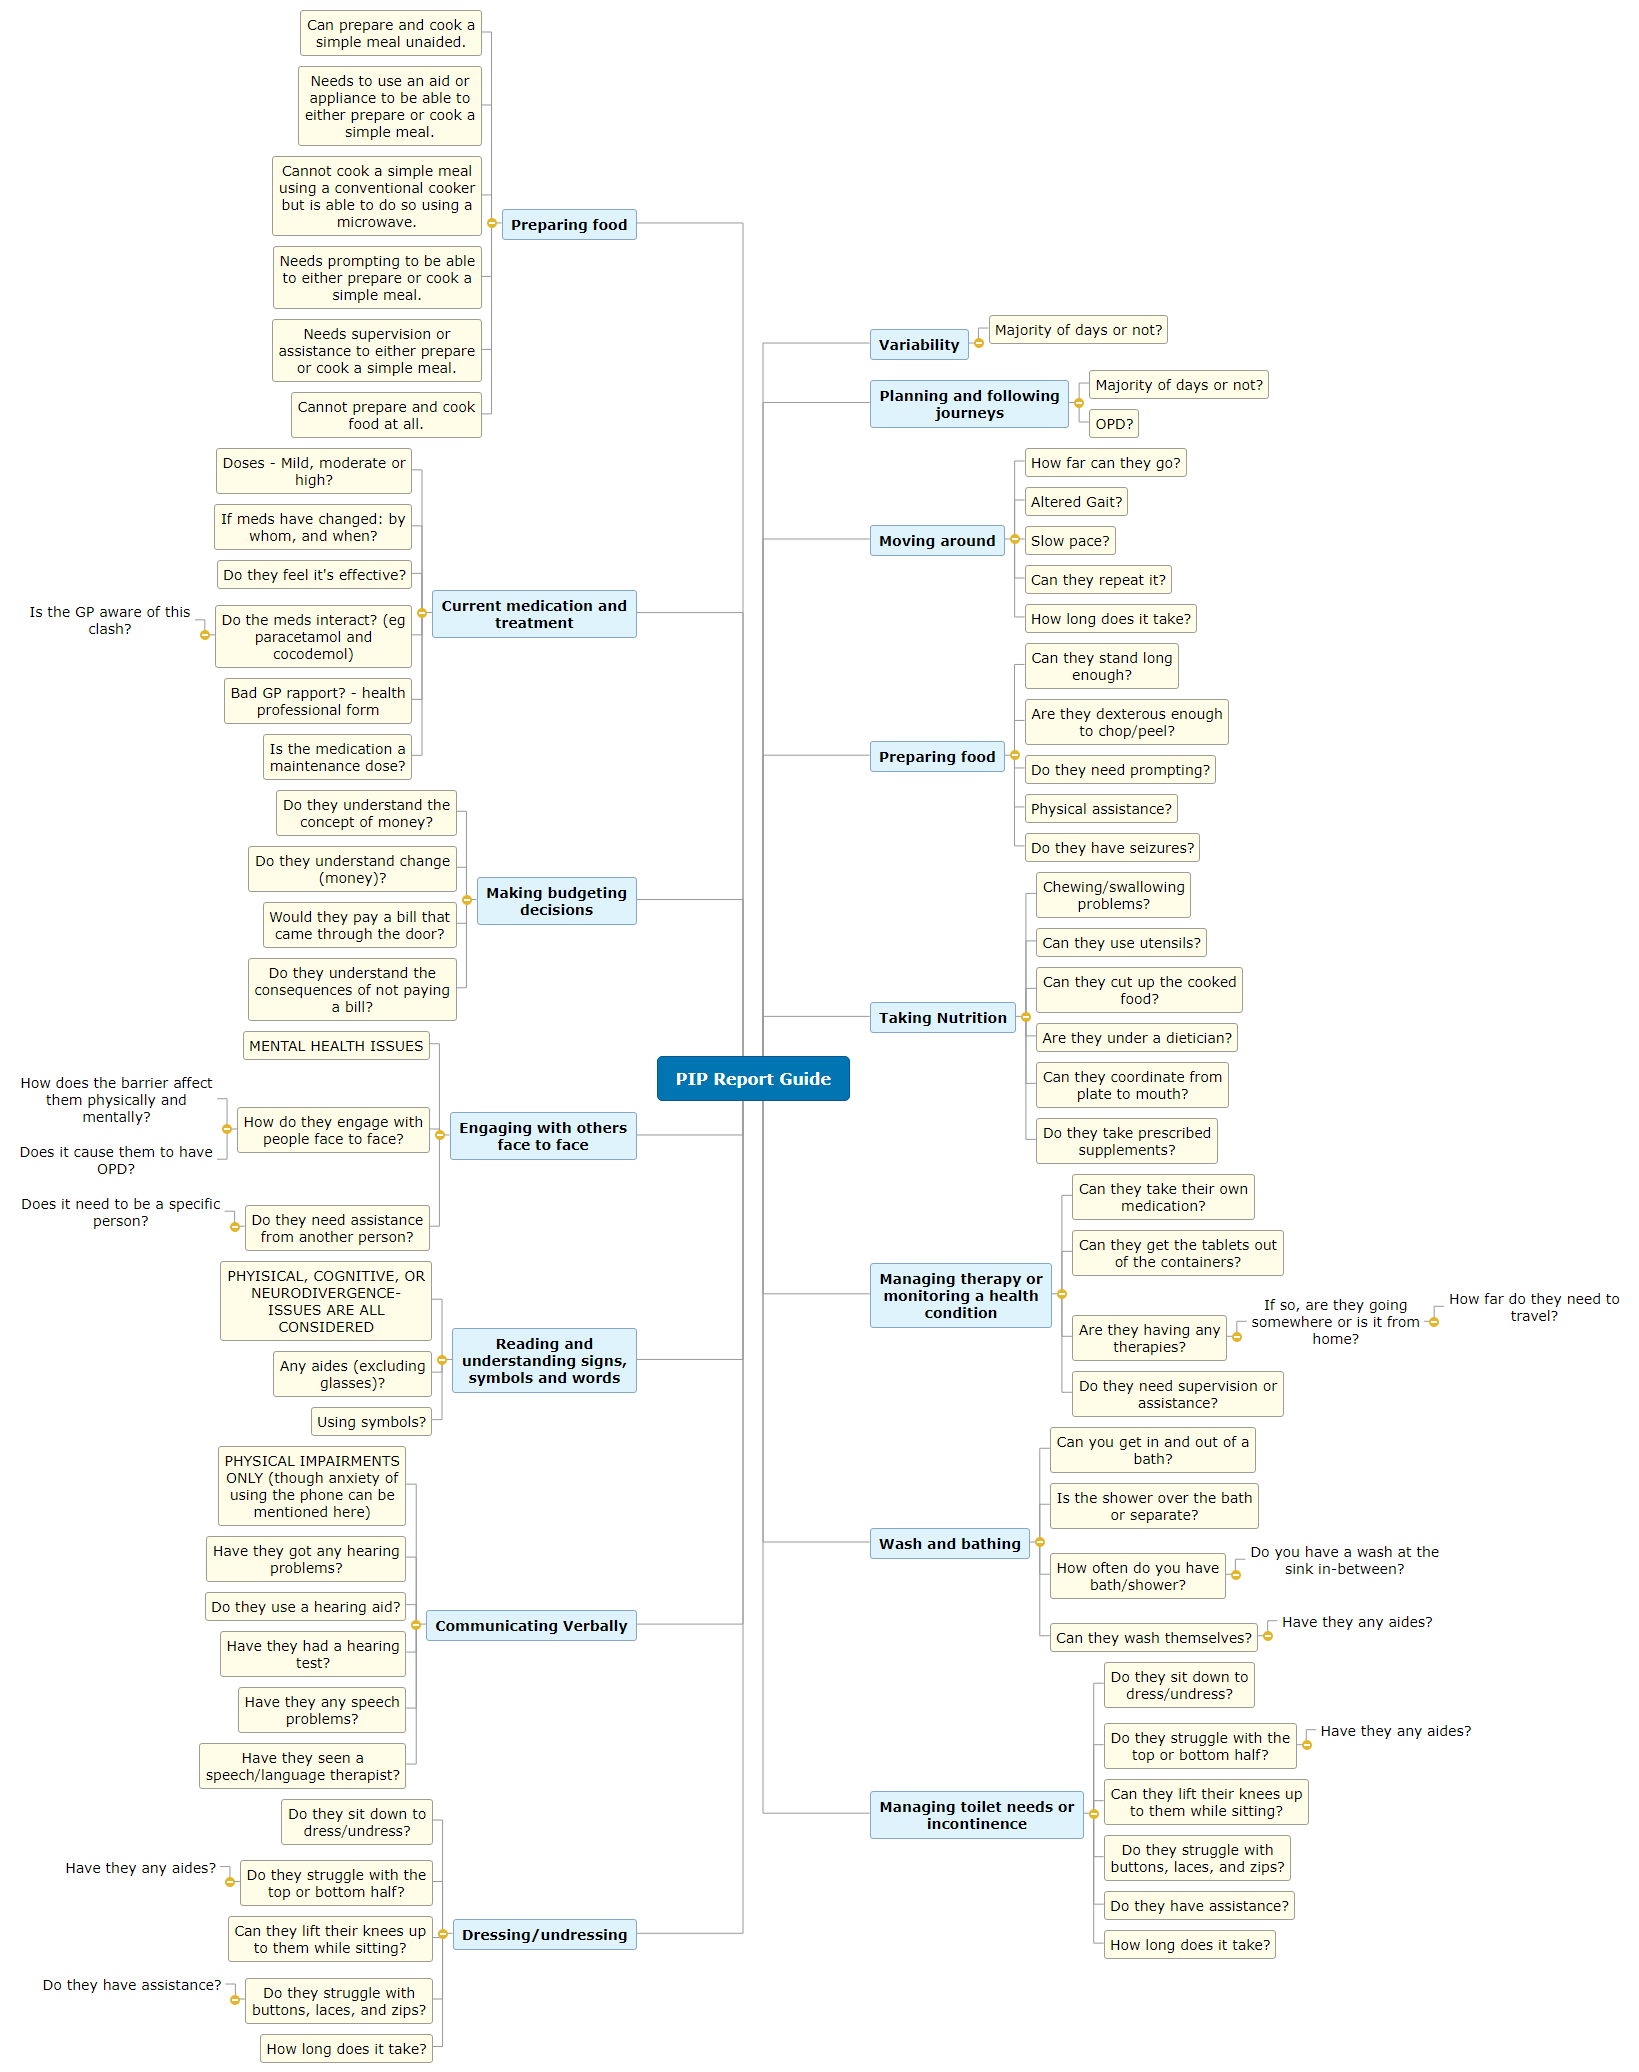 PIP Report Guide image plan Mind Map